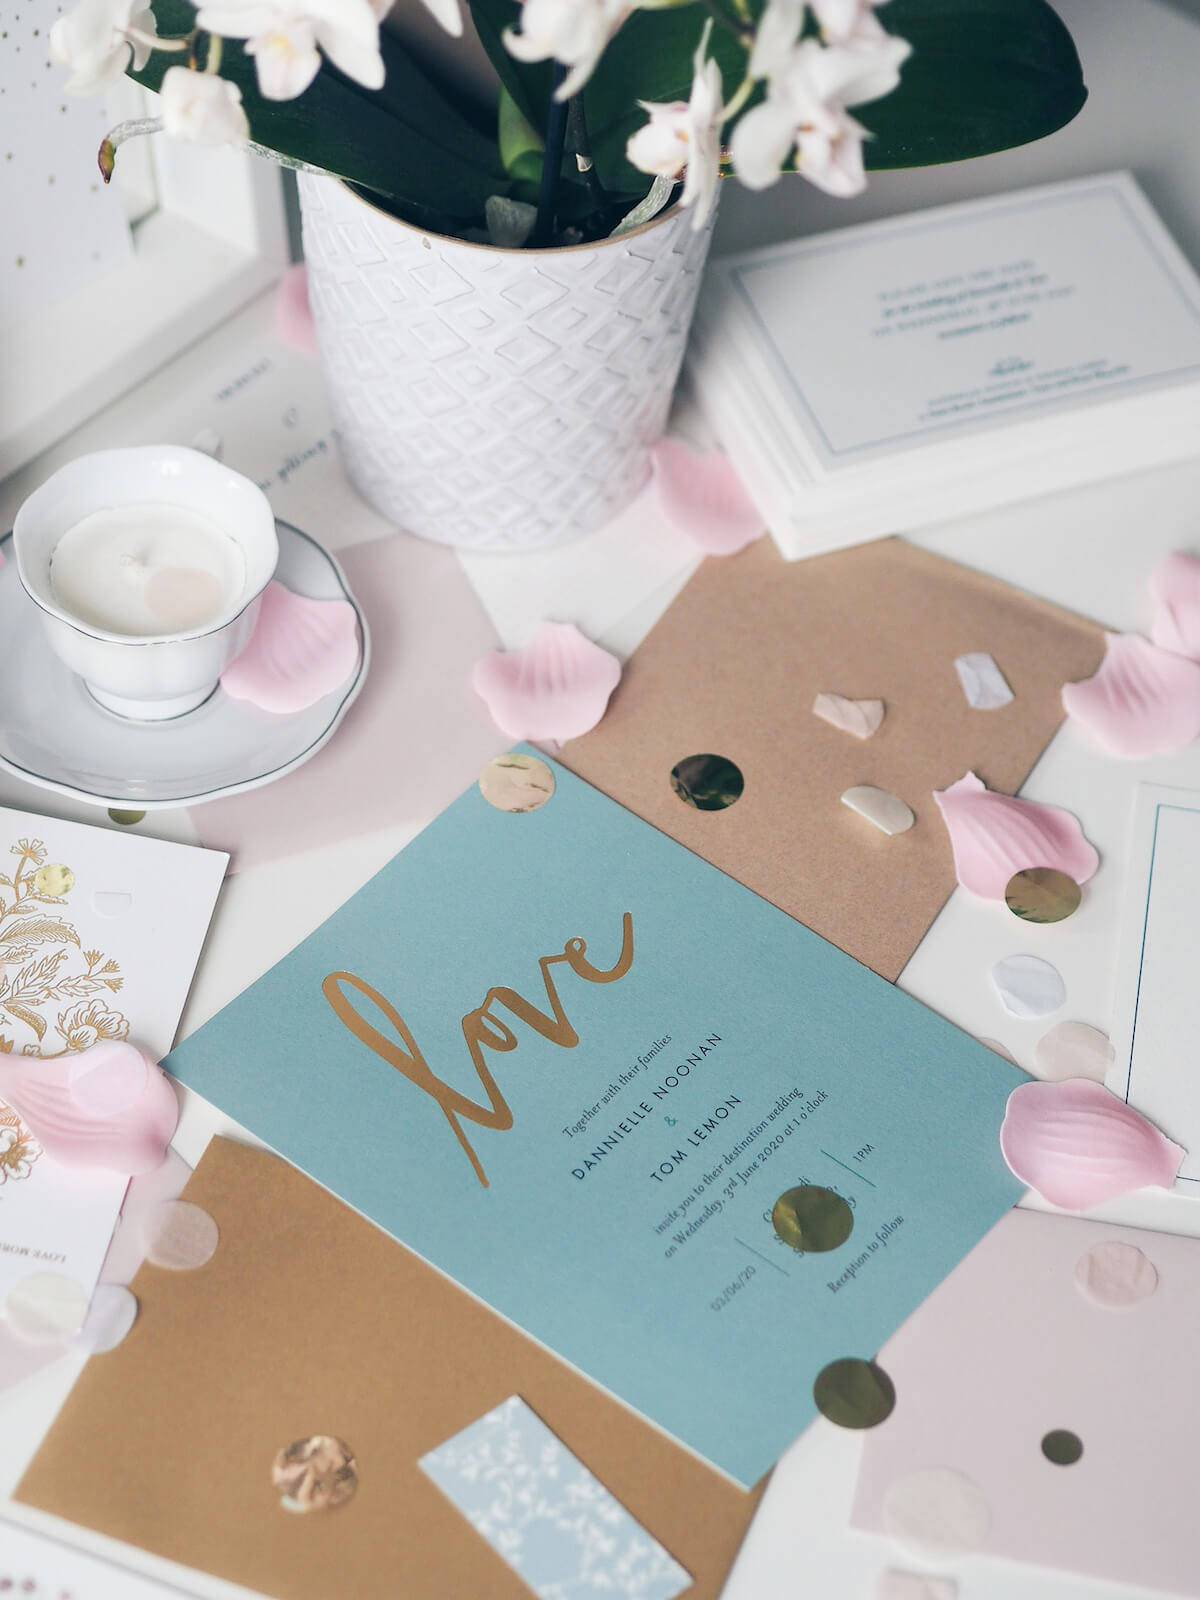 Wedding stationery review: Rosemood Atelier